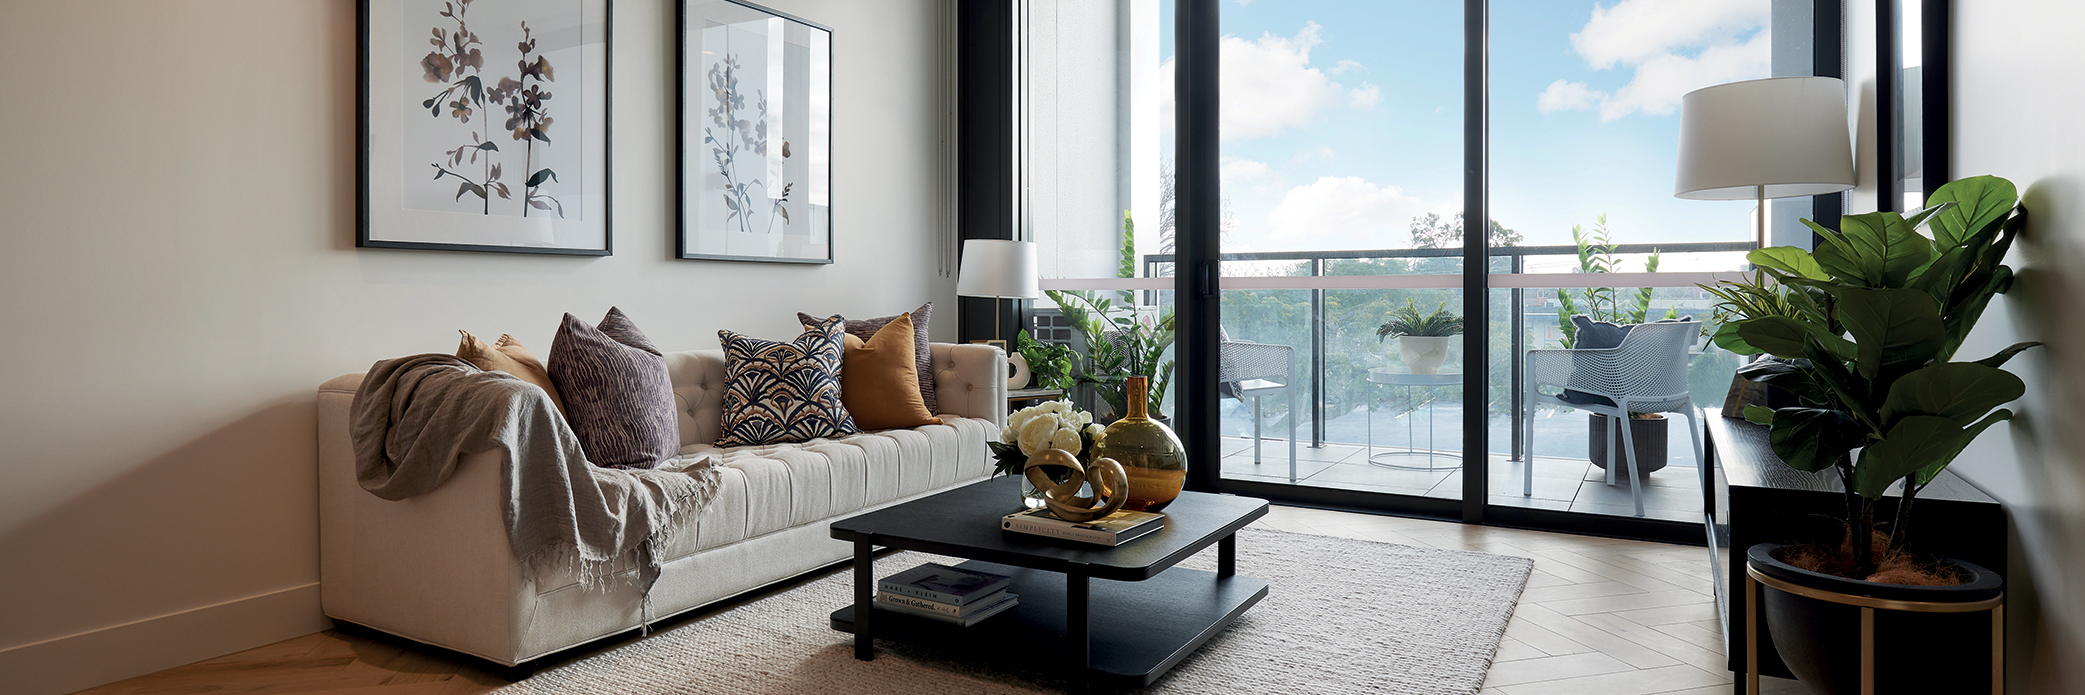 Hyson Apartments at Calvary Kooyong - living and balcony in light scheme